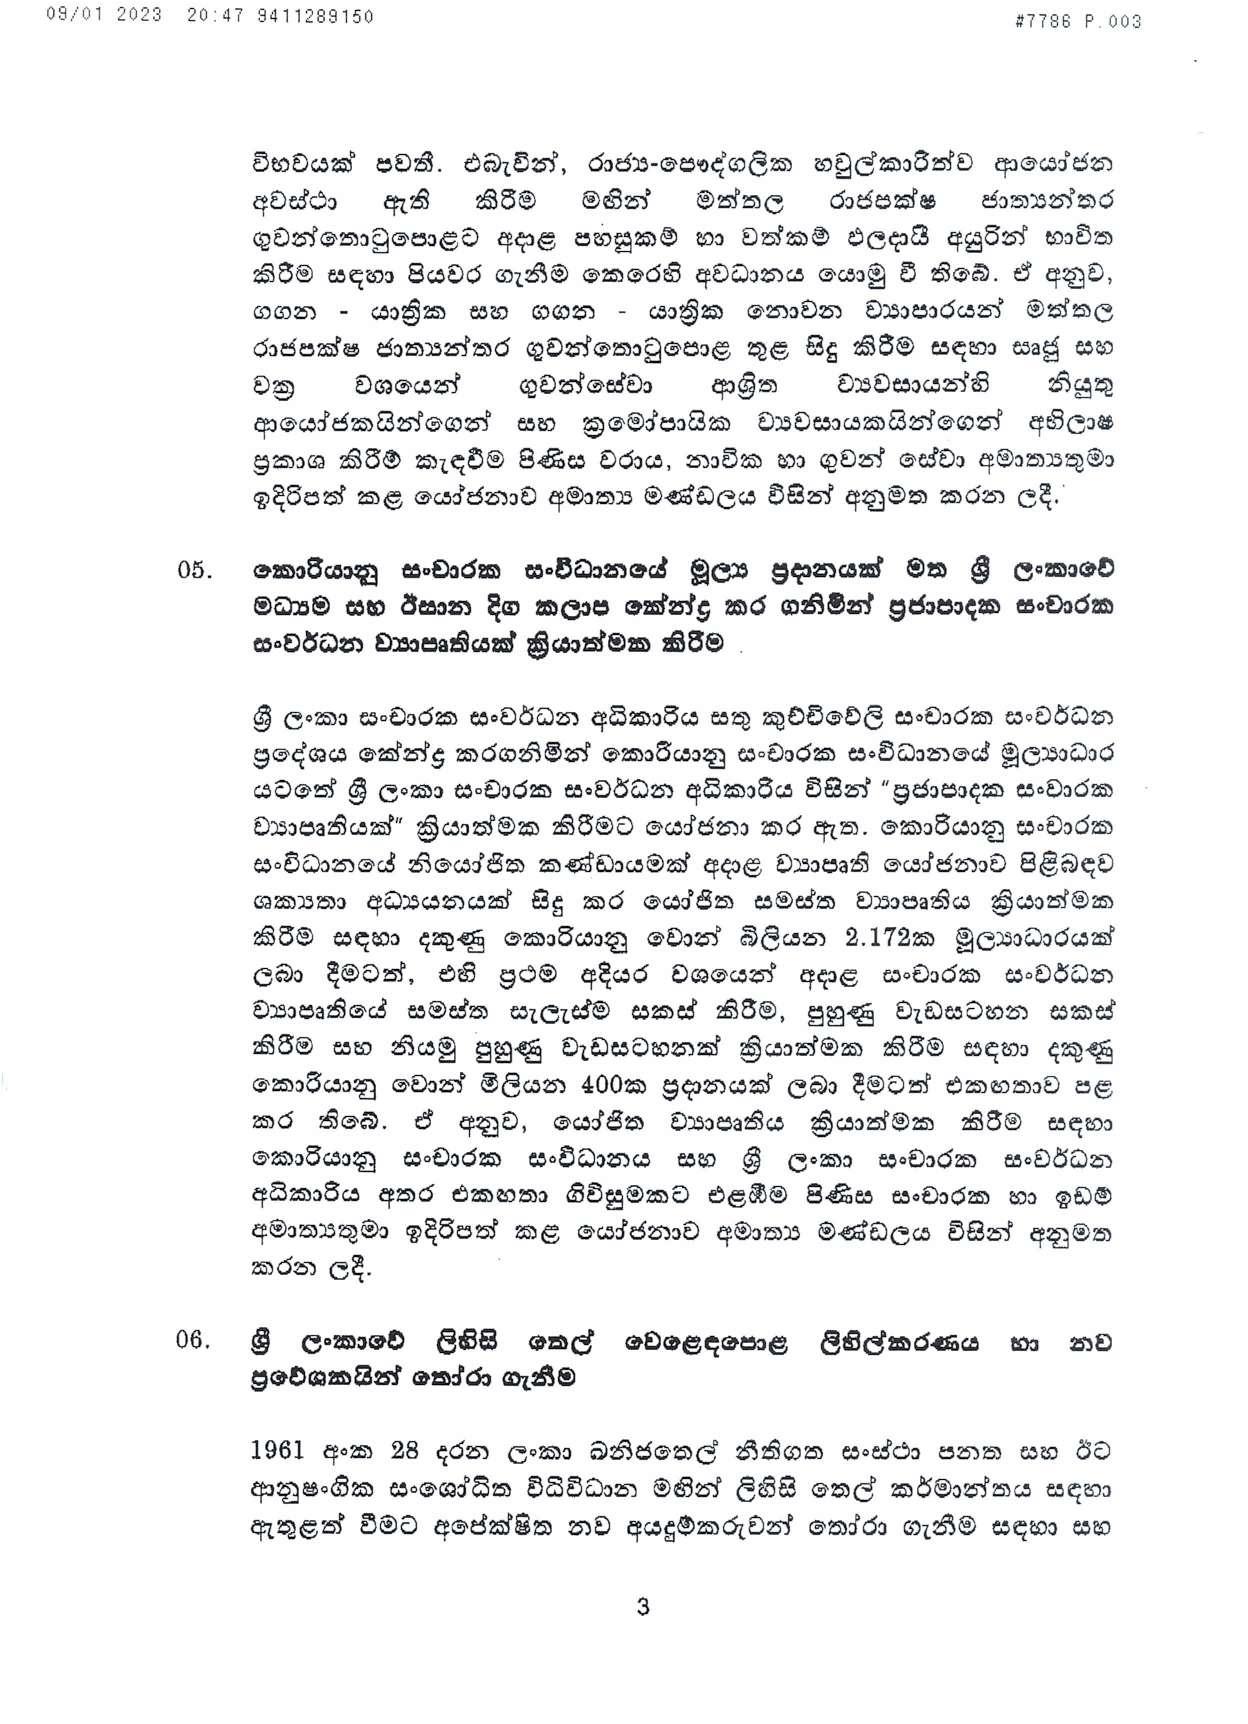 Cabinet Decision on 09.01.2023 page 003